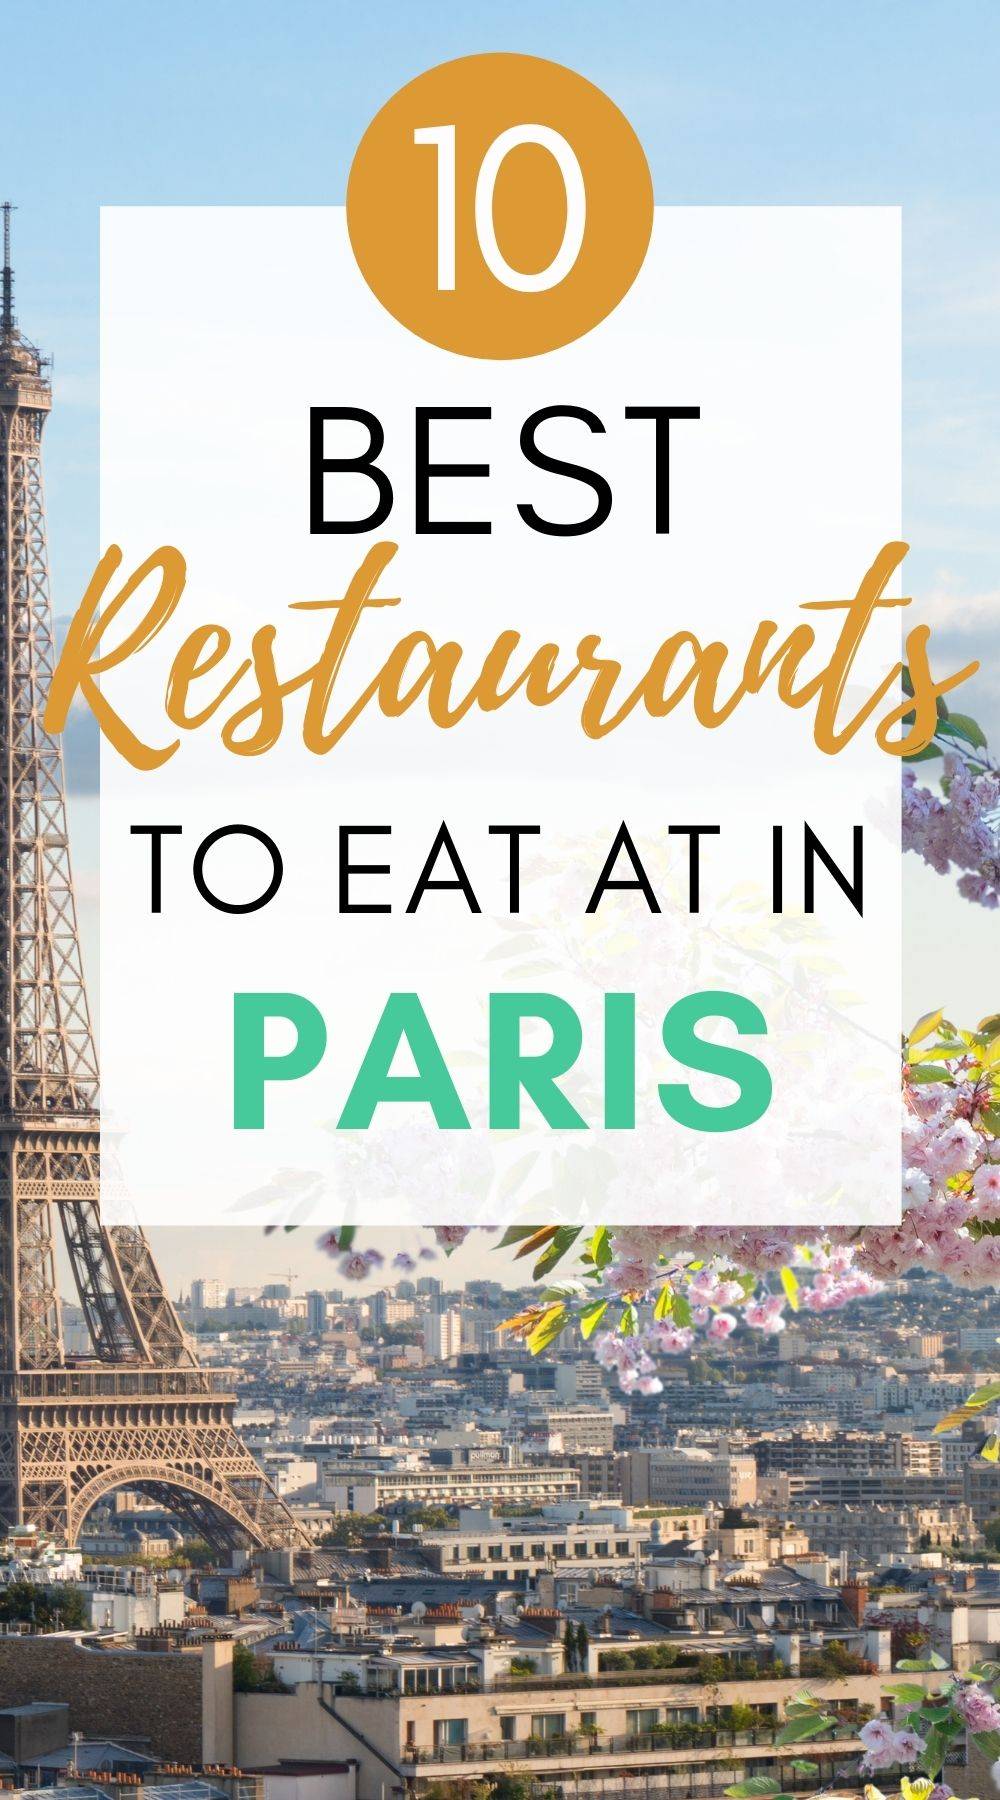 Where to eat in Paris